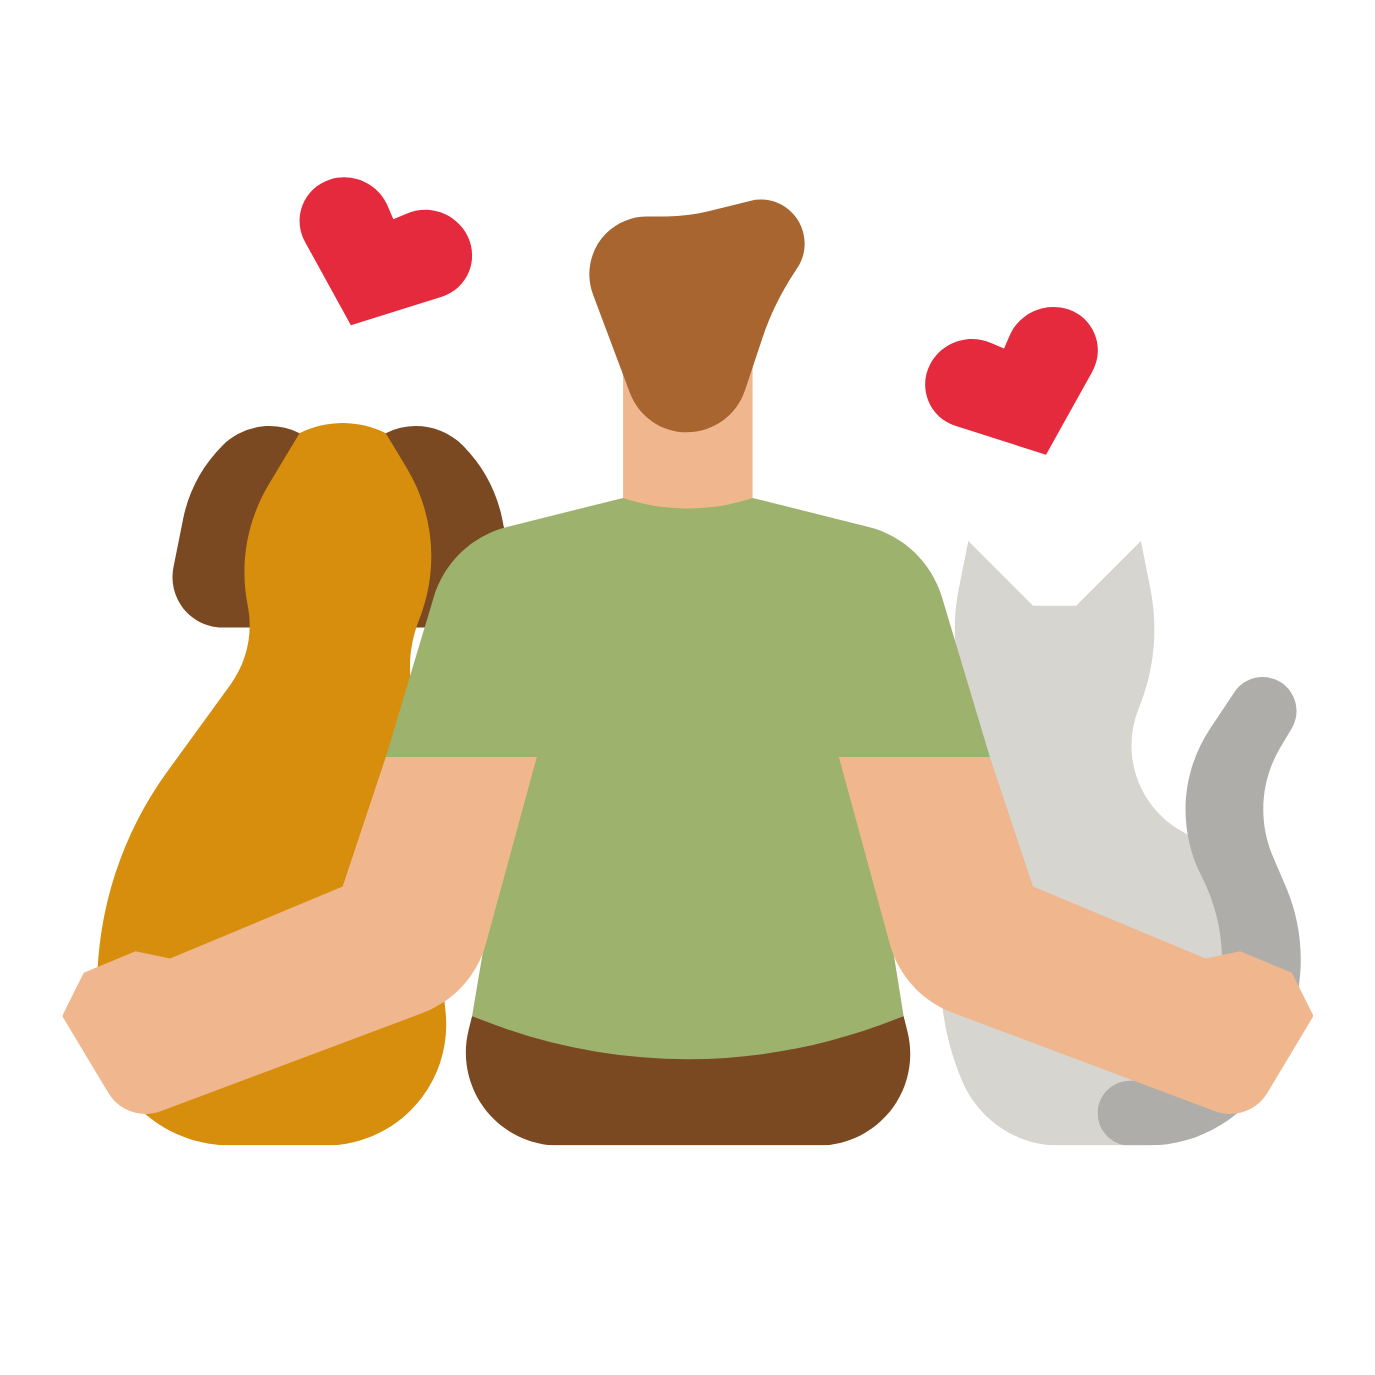 5 Star Rated Pawland's Pet Sitter sitting with Dog & Cat are expressing love